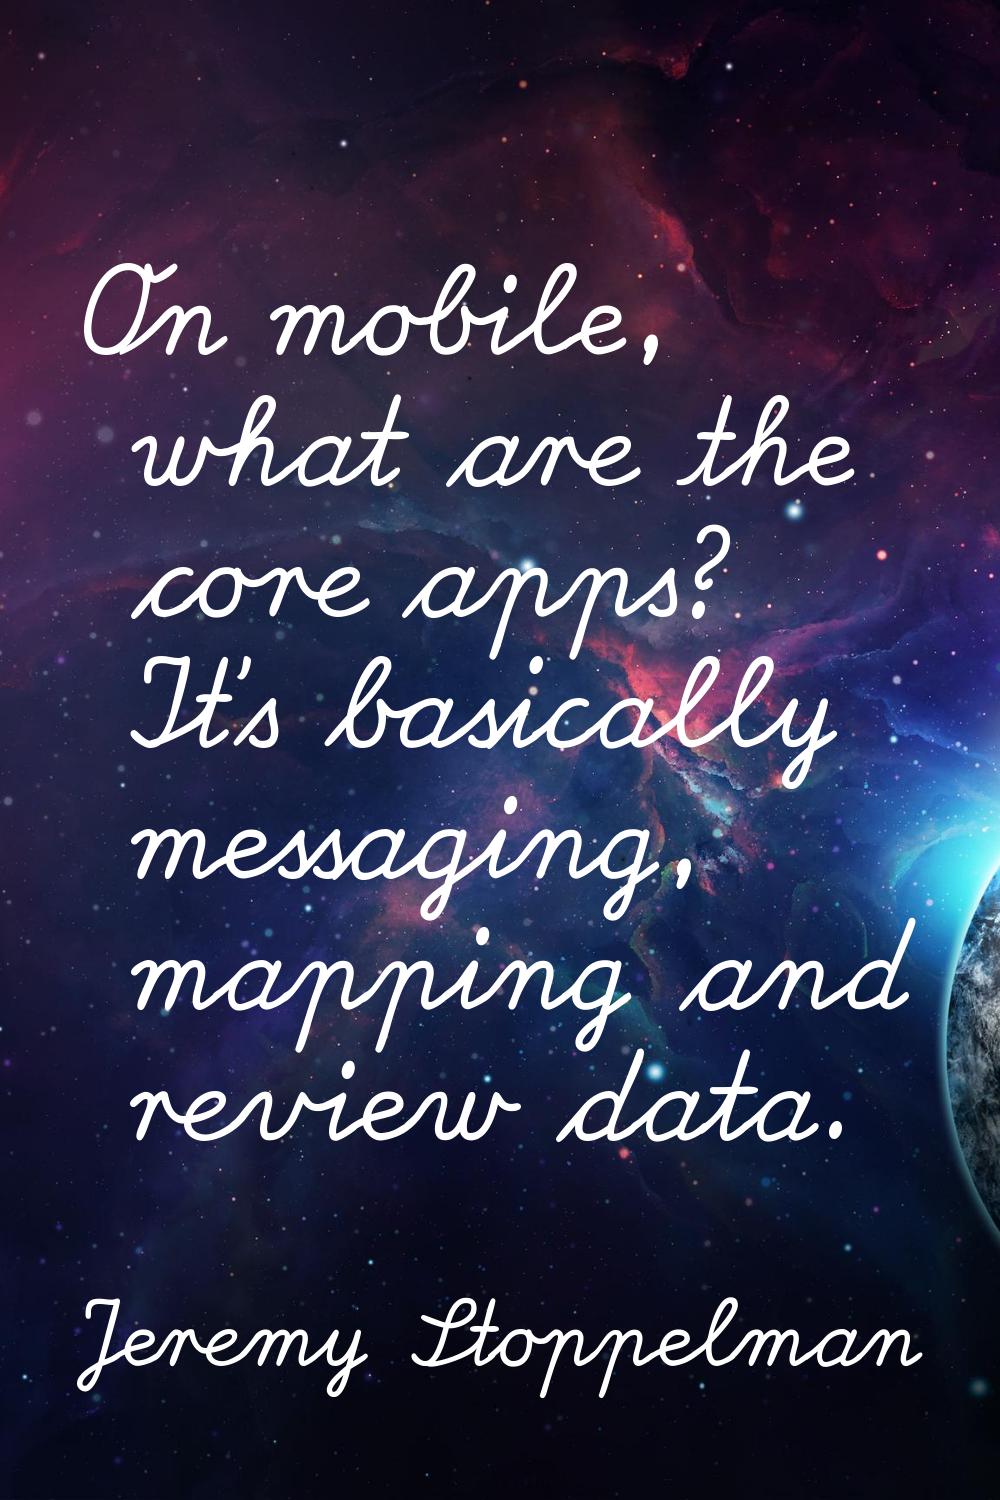 On mobile, what are the core apps? It's basically messaging, mapping and review data.